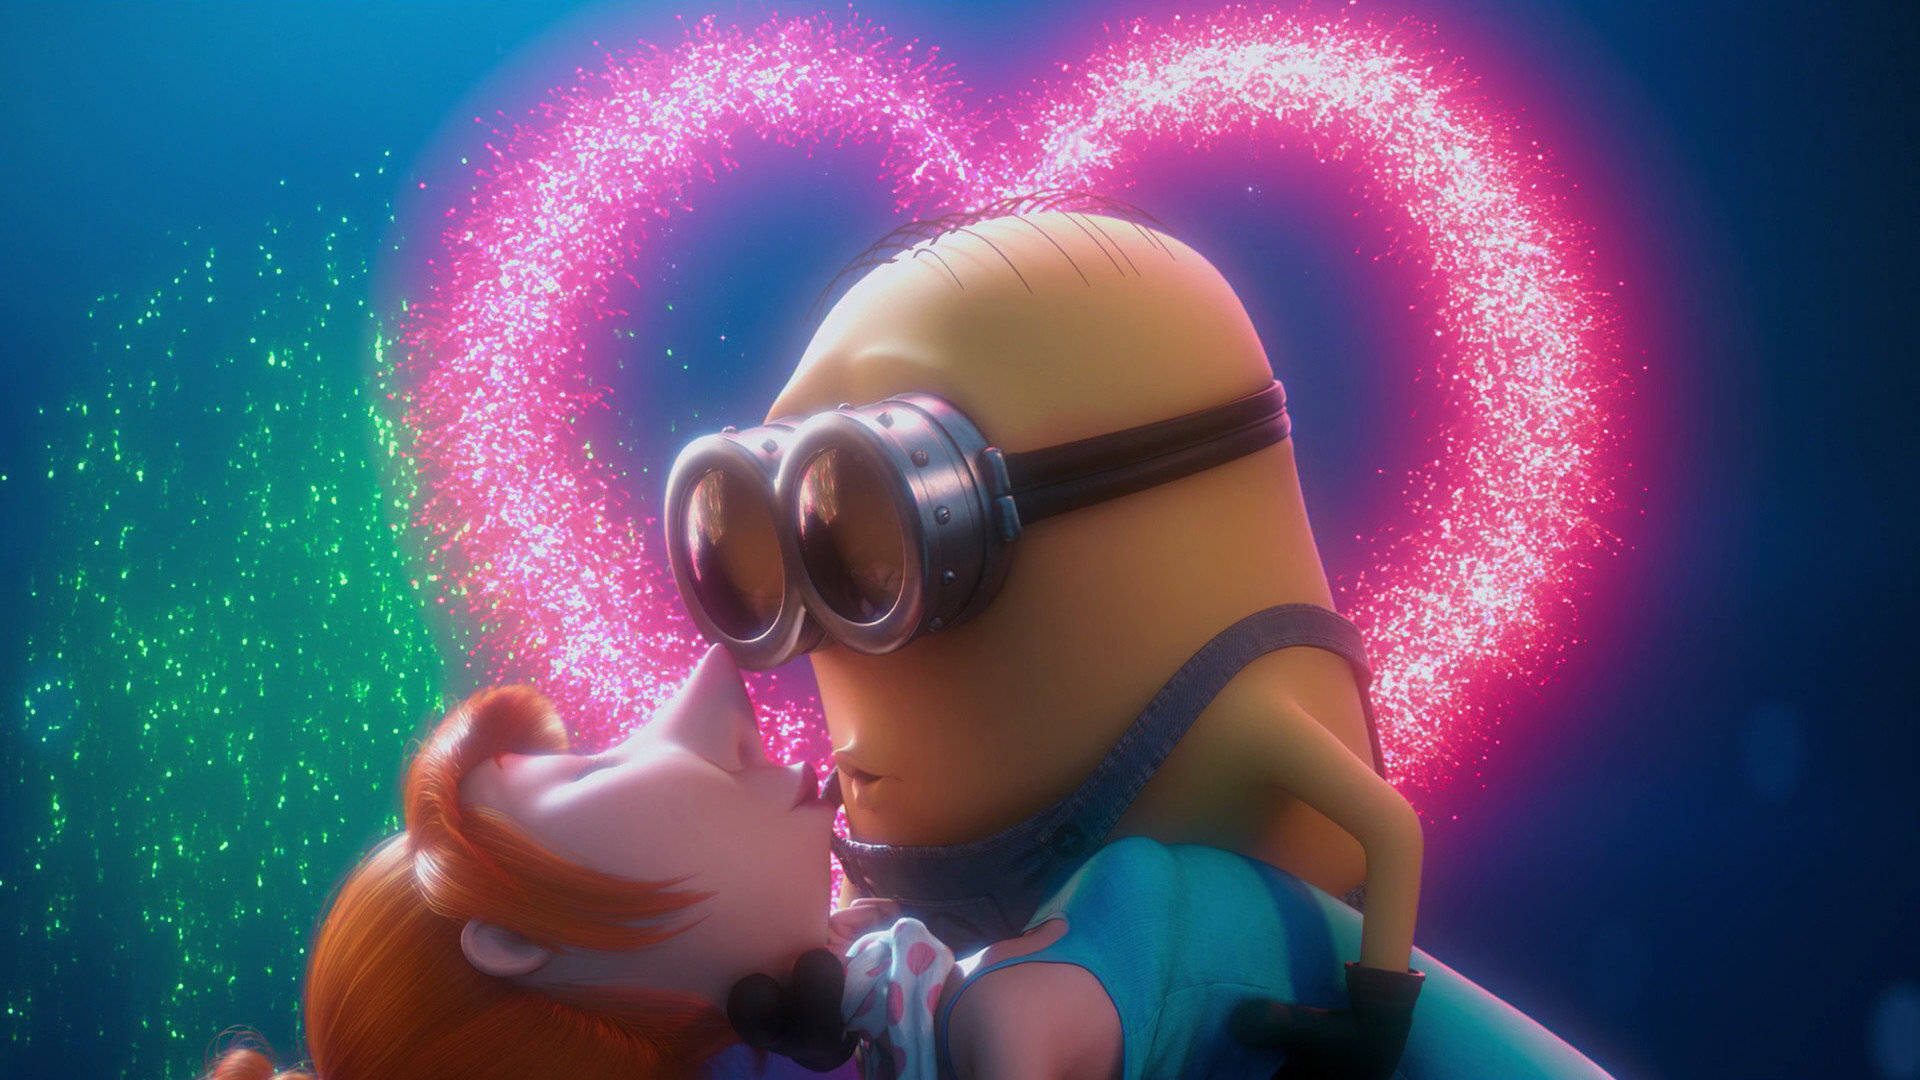 Dave Kissing Lucy Despicable Me 2 Picture